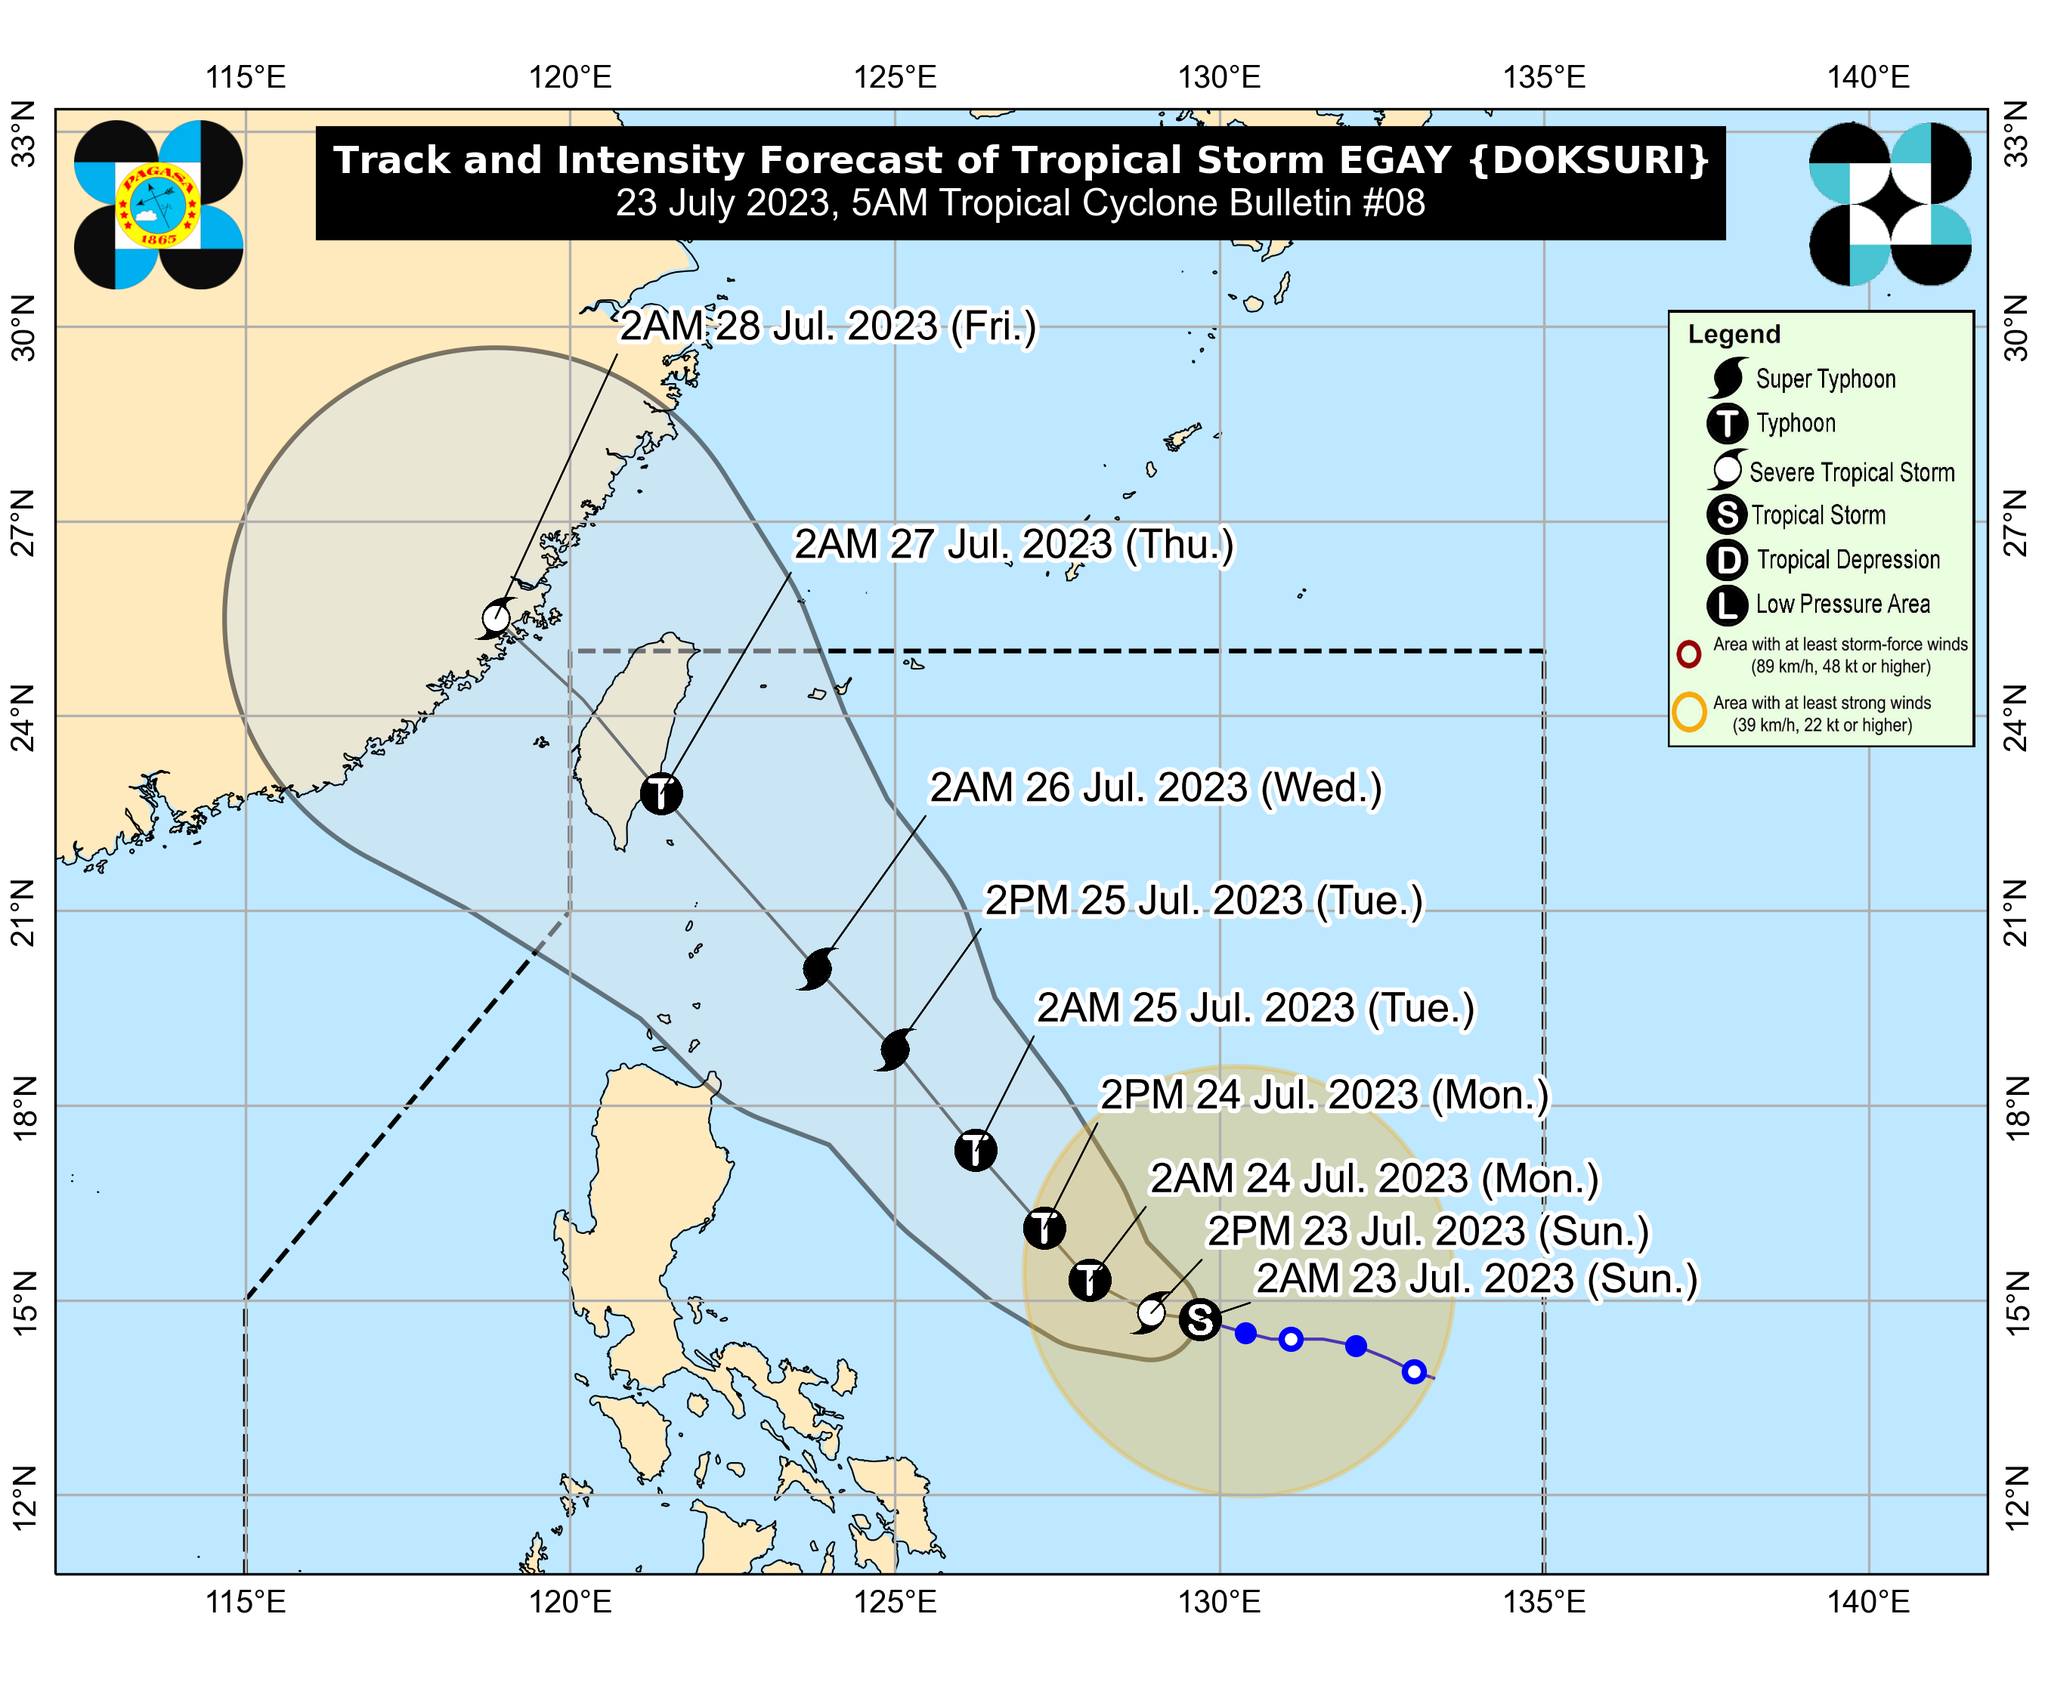 Tropical storm Egay last seen at 705 kilometers east of Daet, Camarines Norte, moving 10 kilometers per hour and carrying maximum sustained winds of 85 kph and gusts of up to 105 kph. (Photo courtesy of Pagasa)